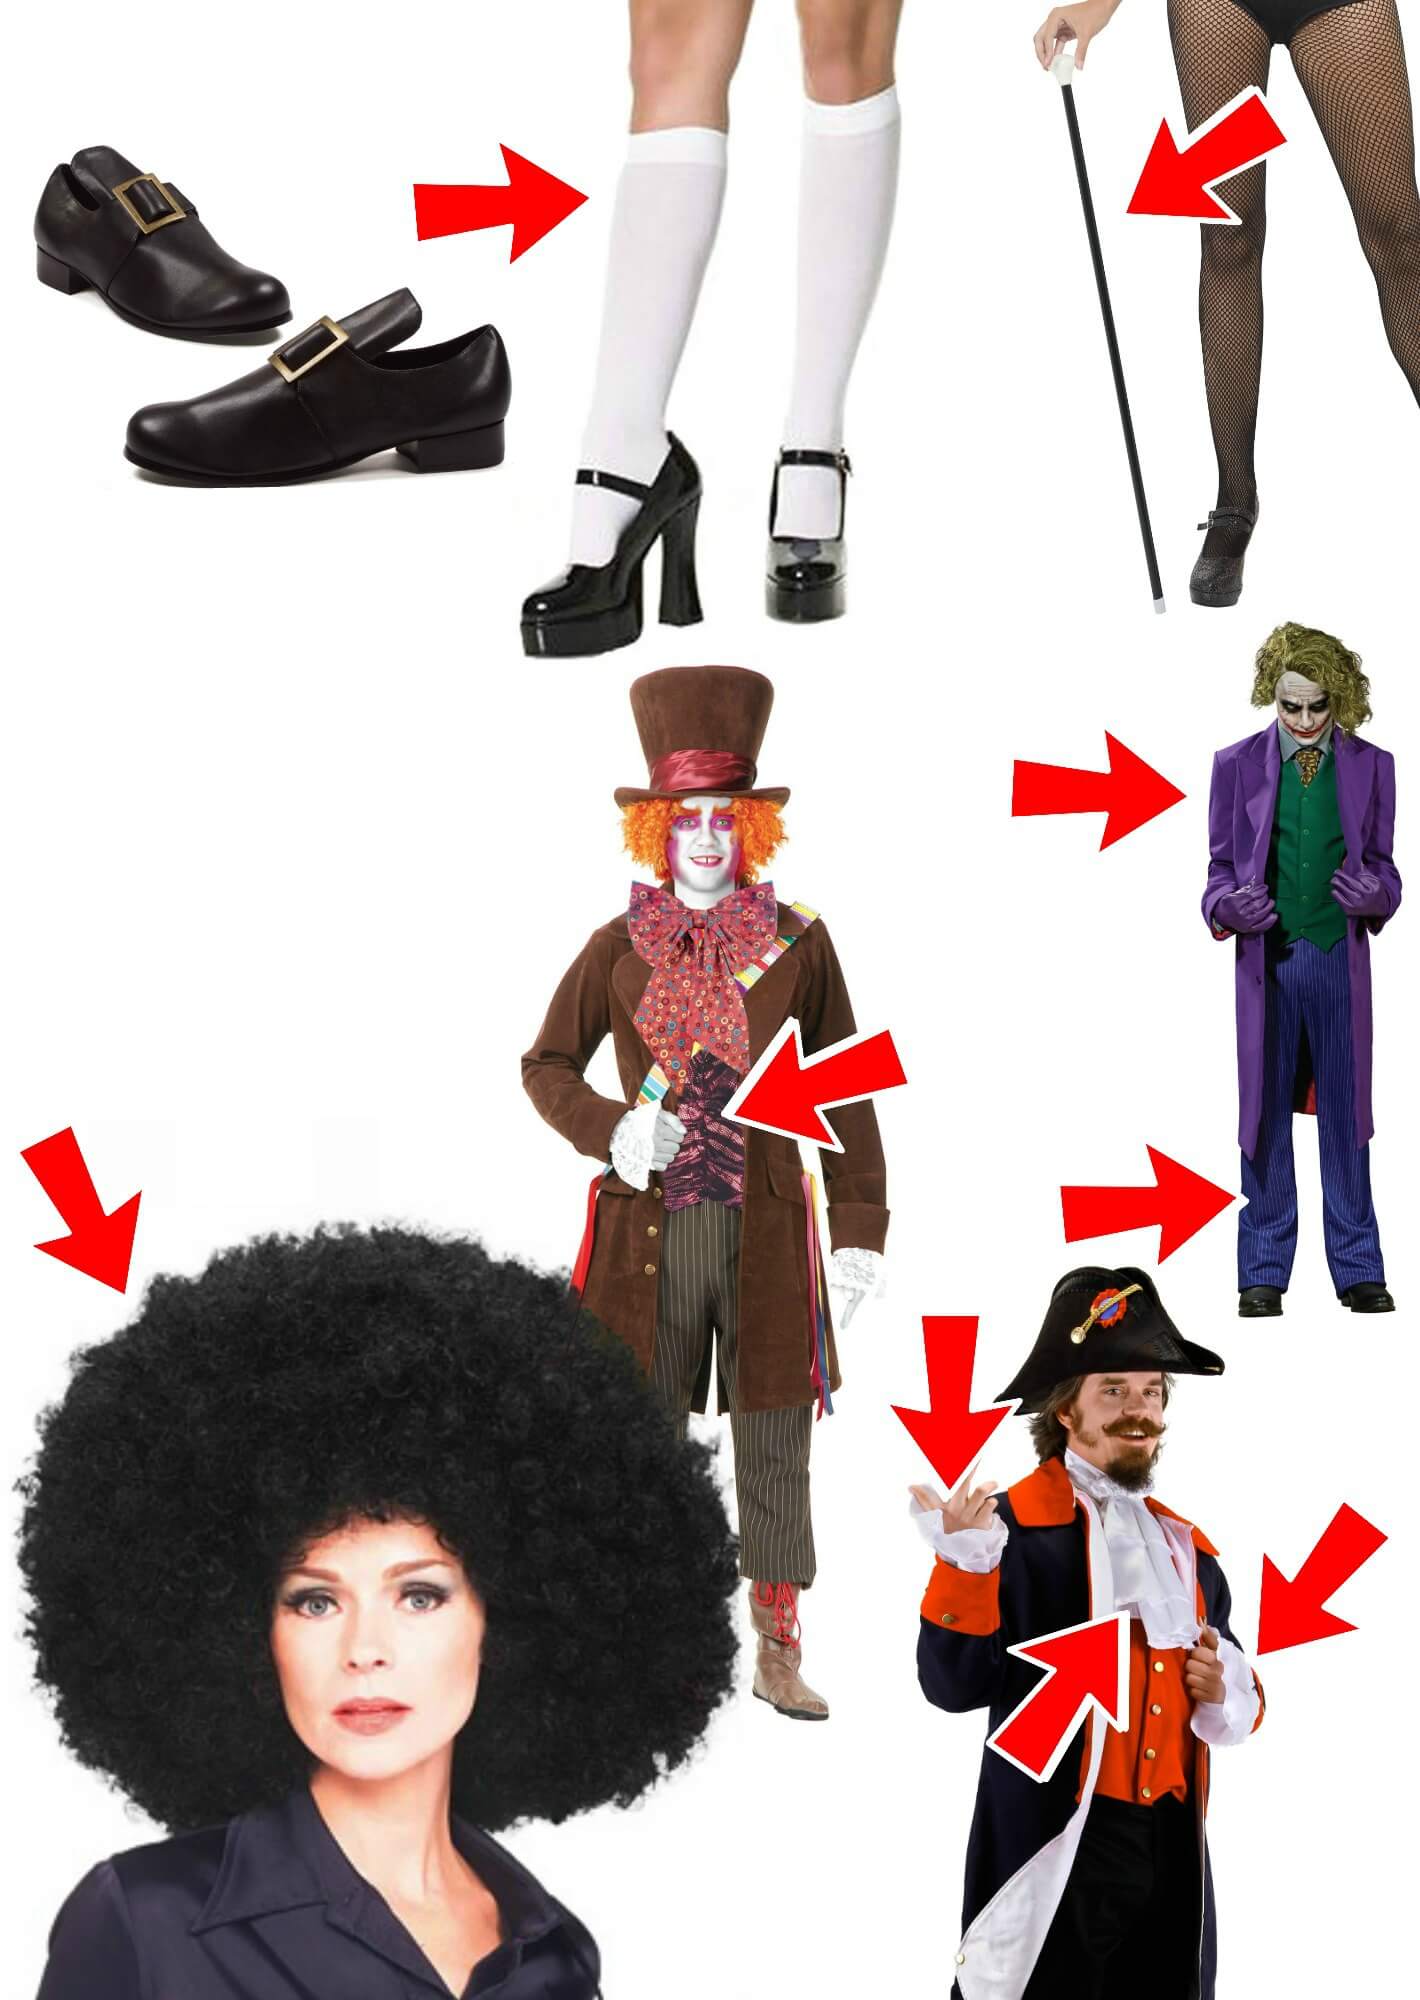 DIY Hamilton Costume Ideas for Halloween That Will Leave You Satisfied ...